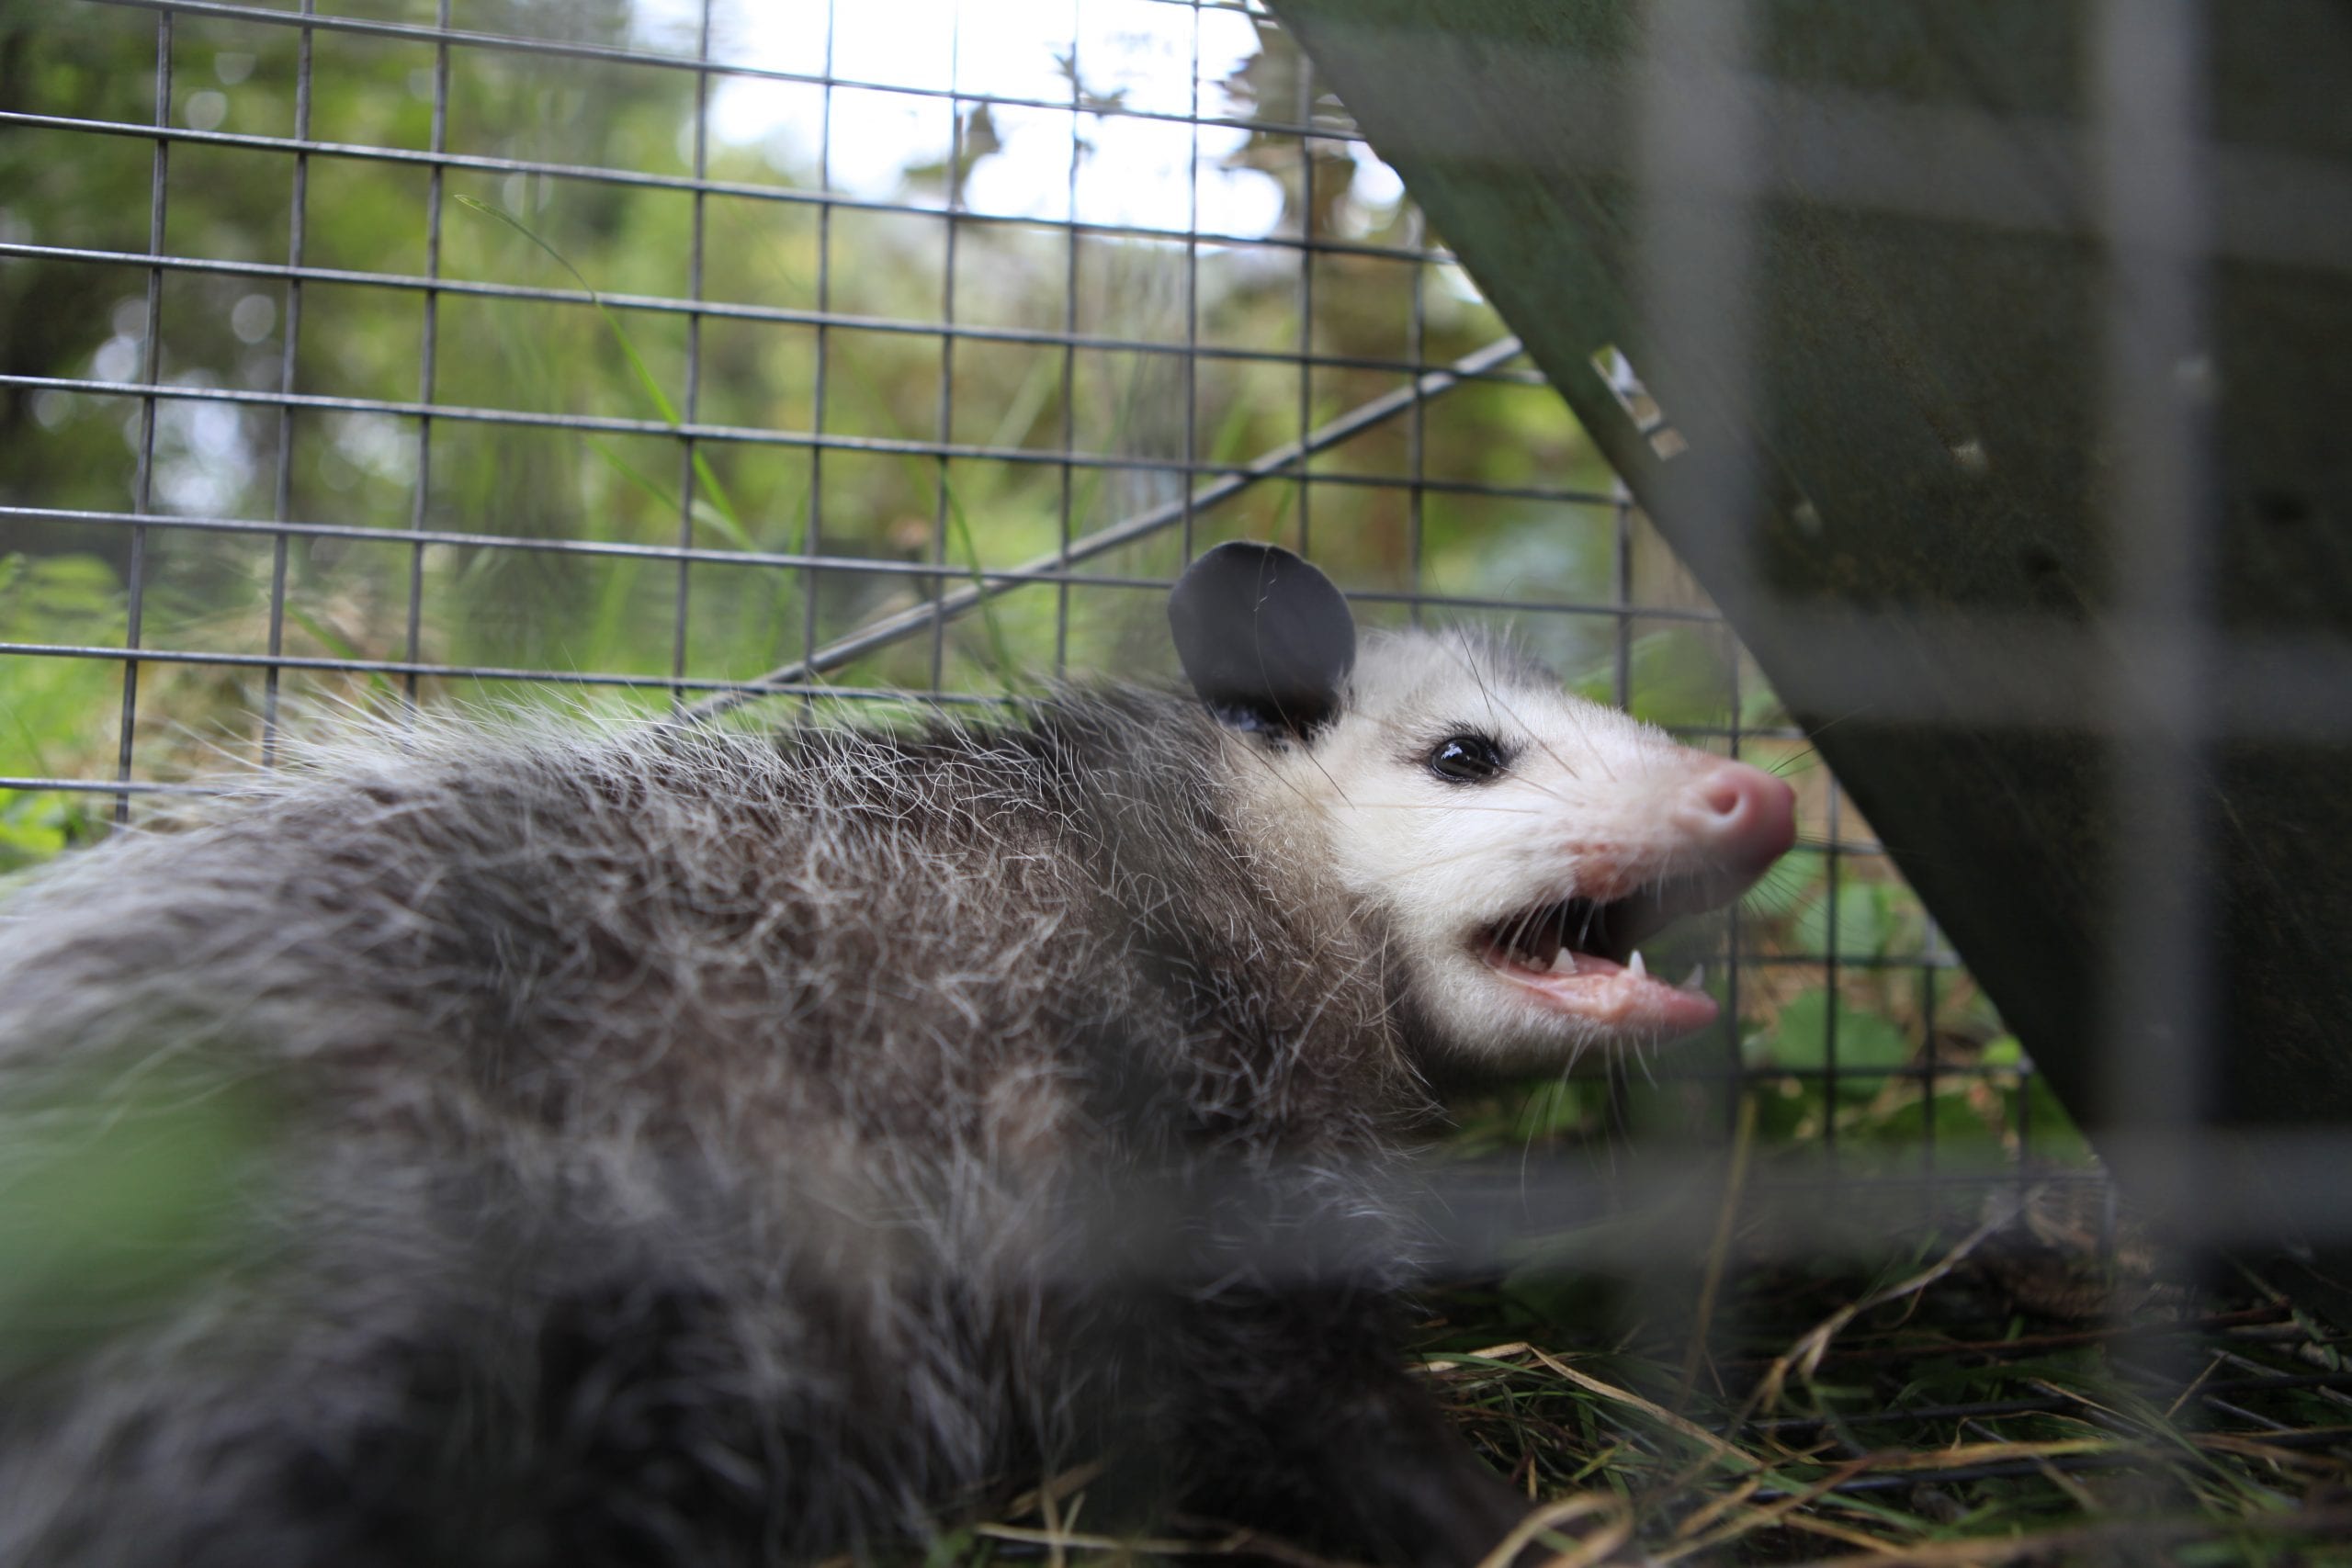 Opossum in cage after being caught by humane trap meant to catch Raccoon damaging house. The possum was released